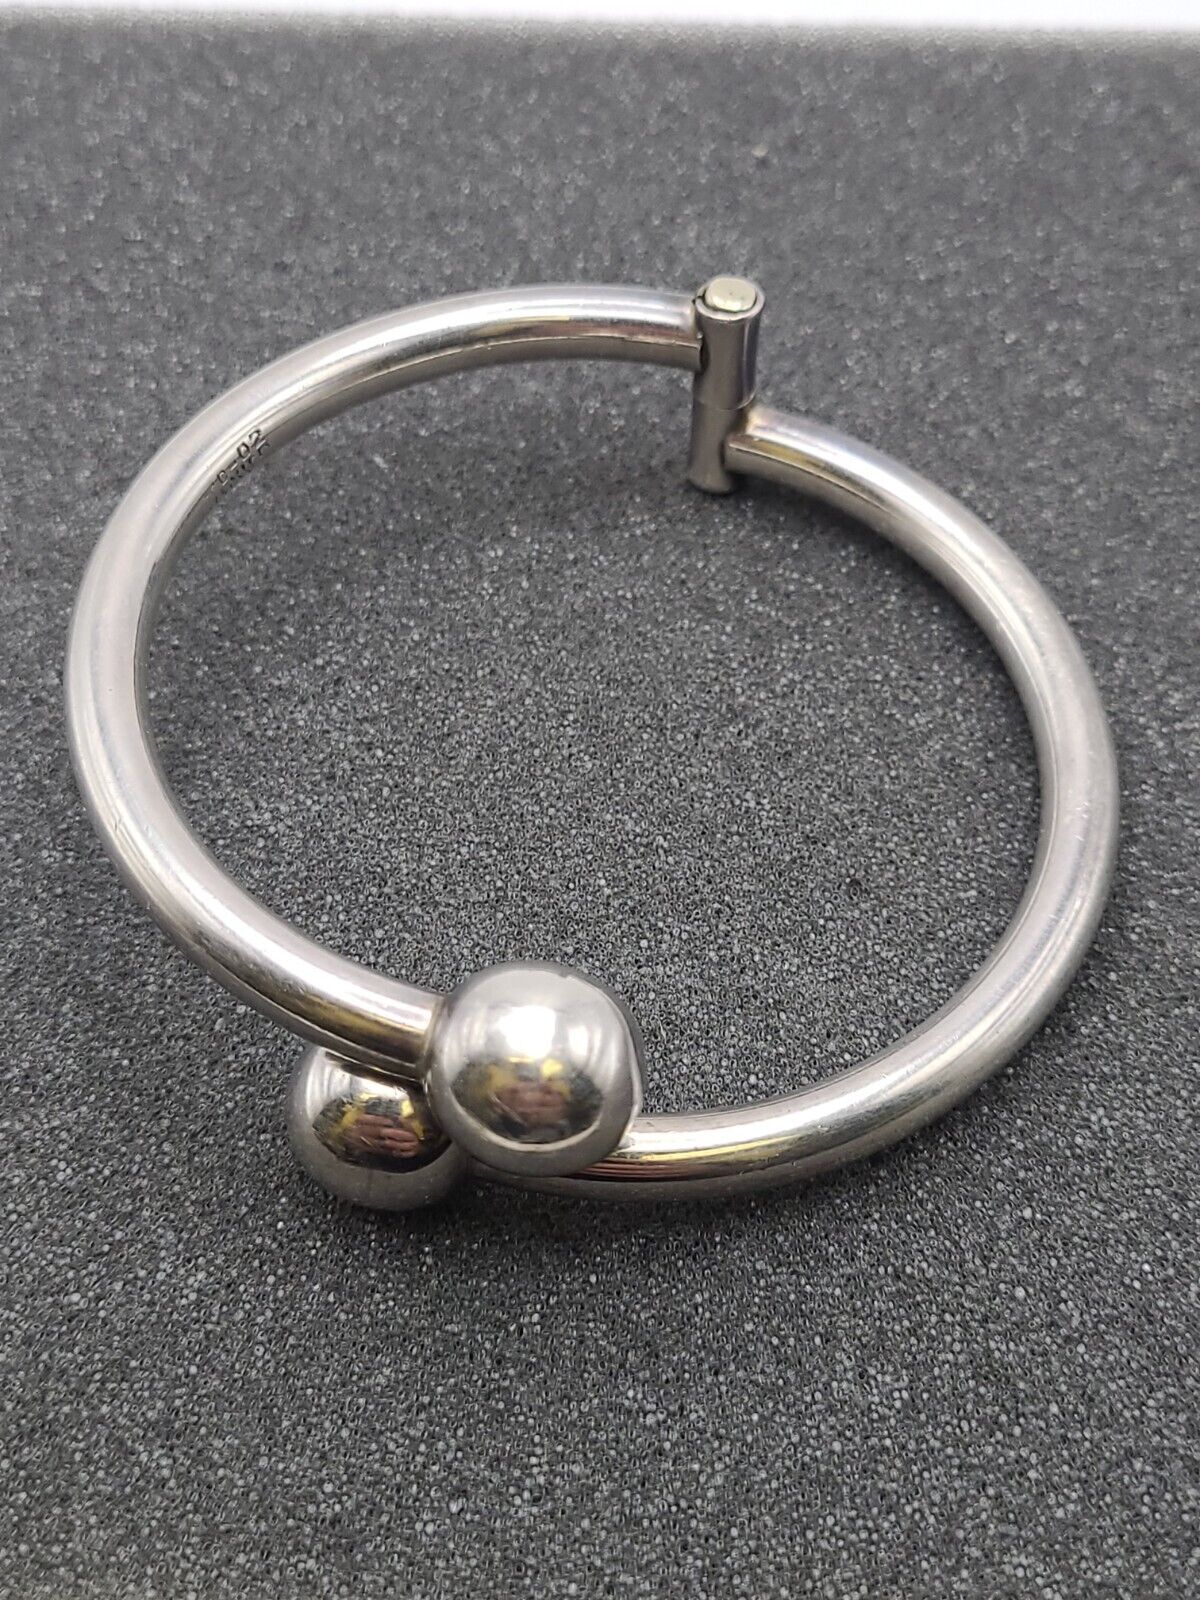 Vintage Taxco .925 Sterling Silver Hinged Cuff Bracelet With Ball Ends